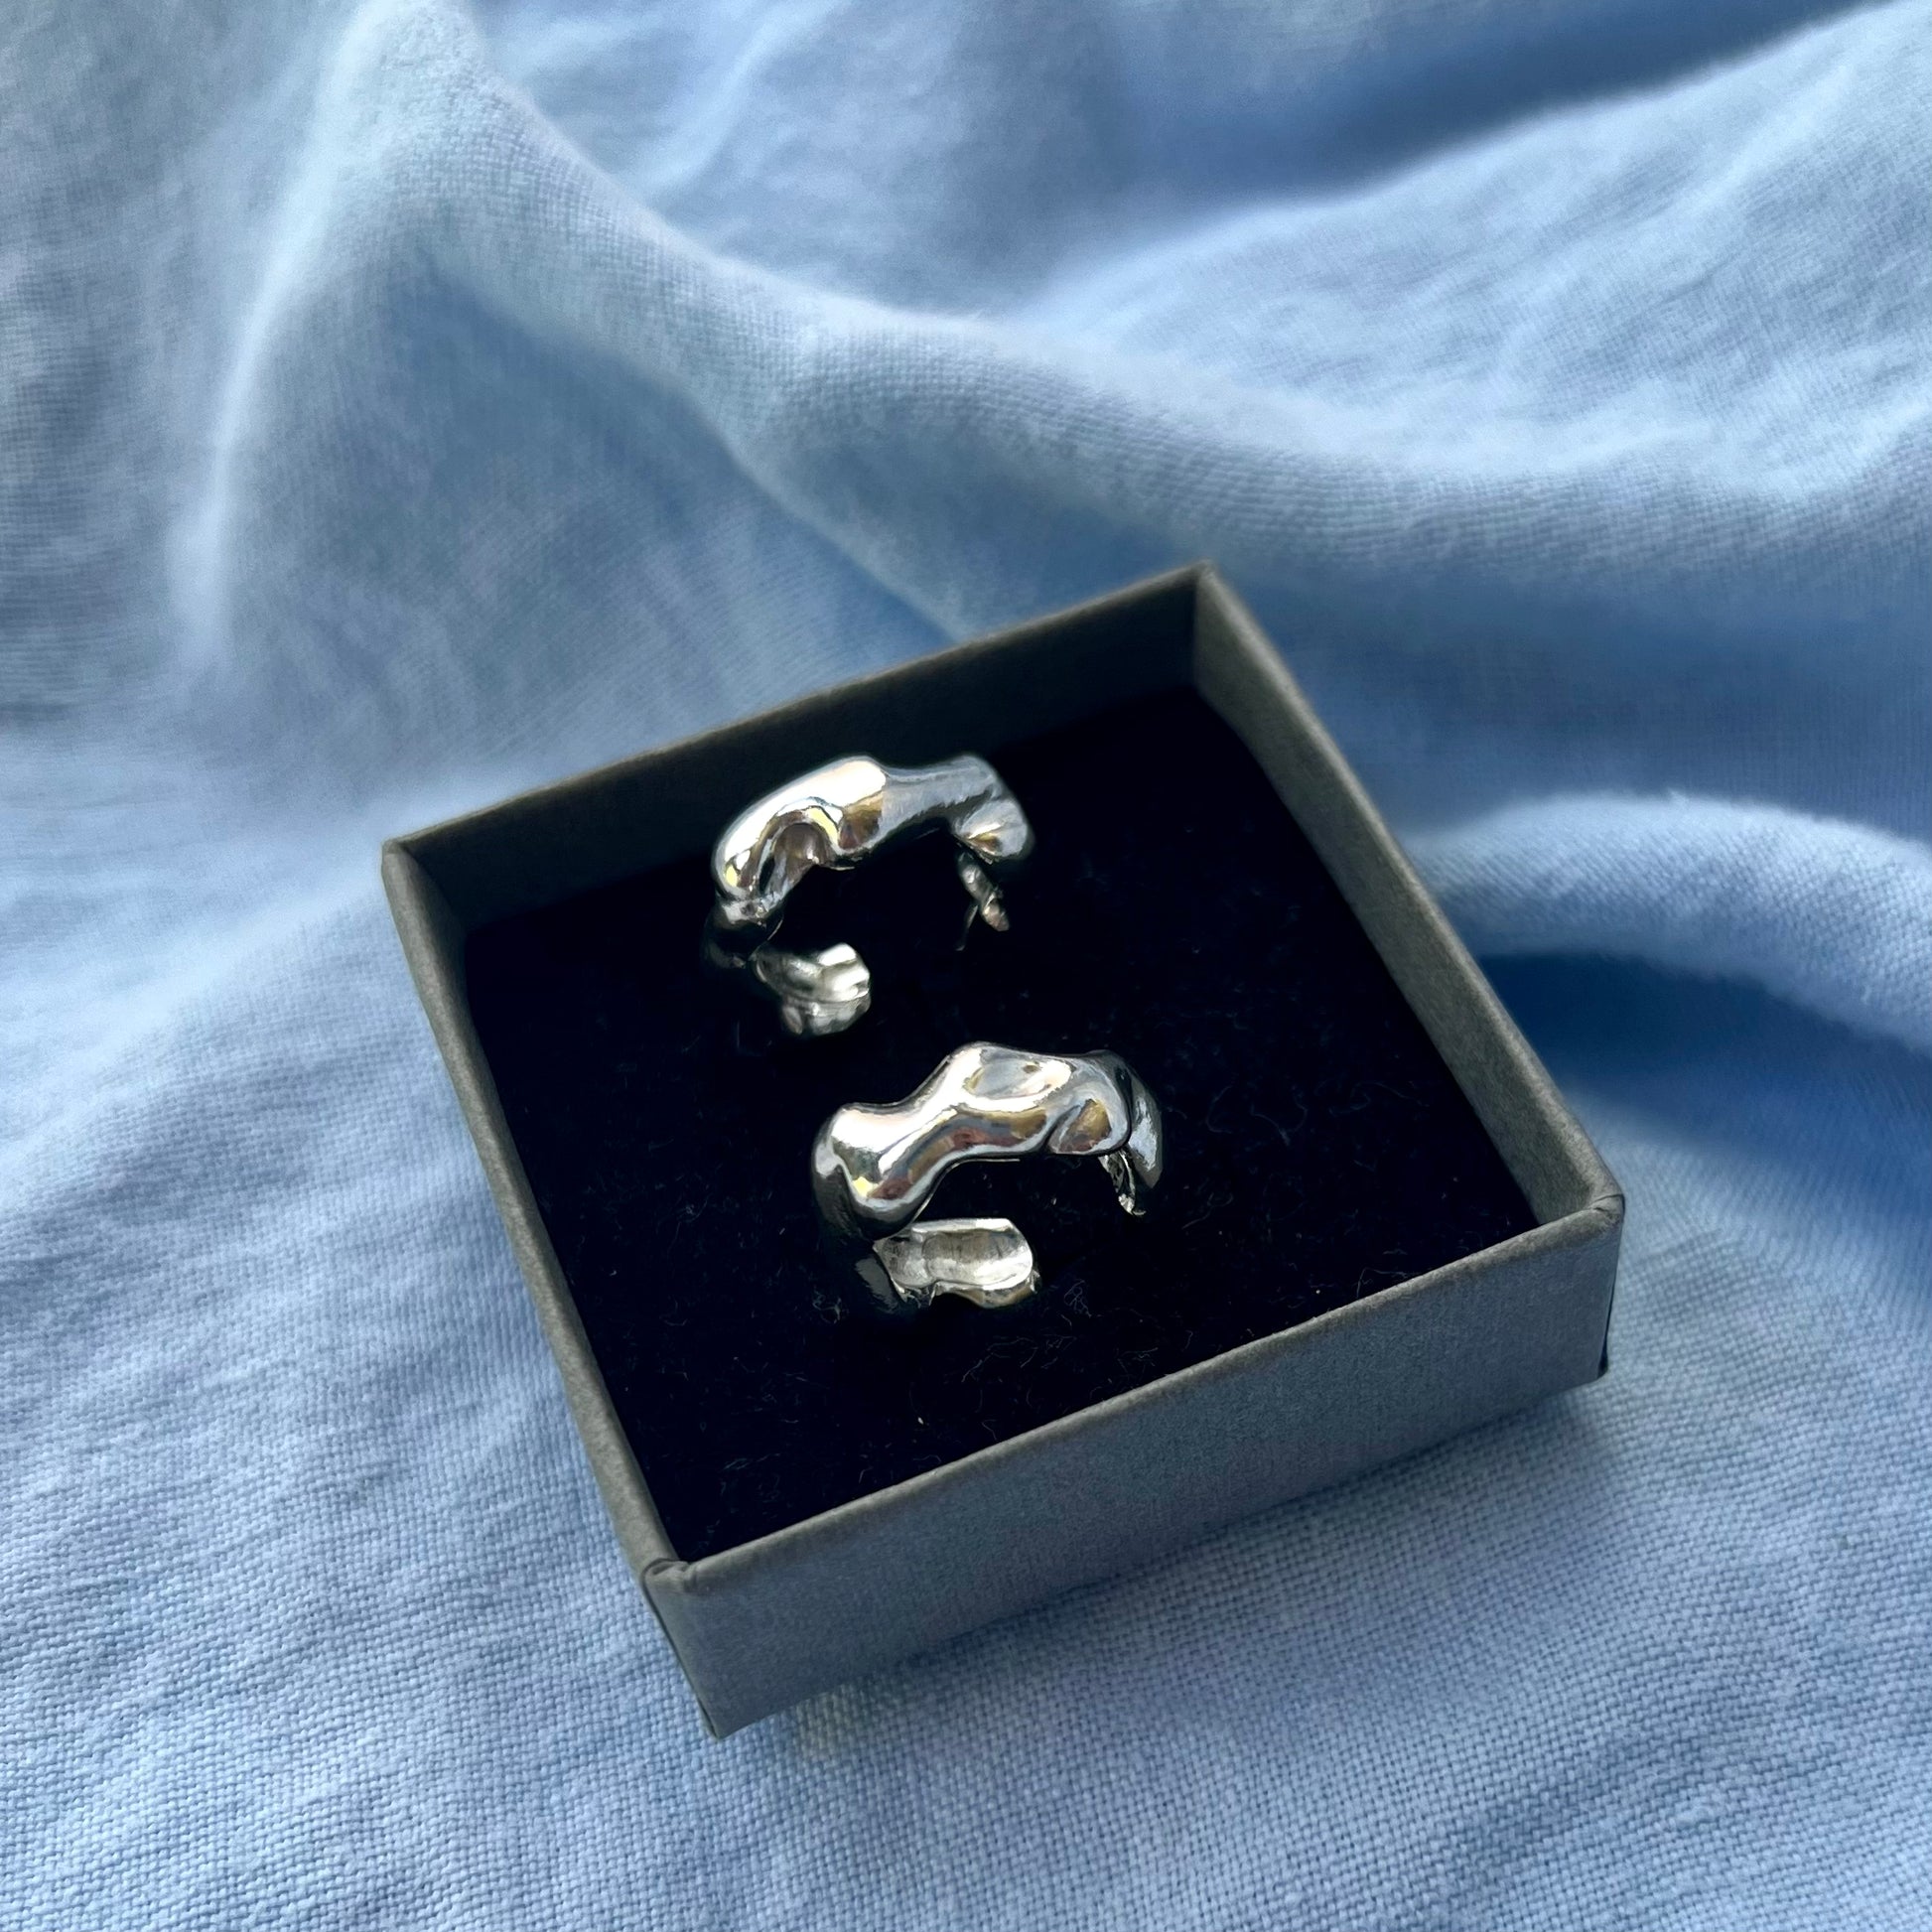 Small wavy silver earrings in a grey box on a blue background.